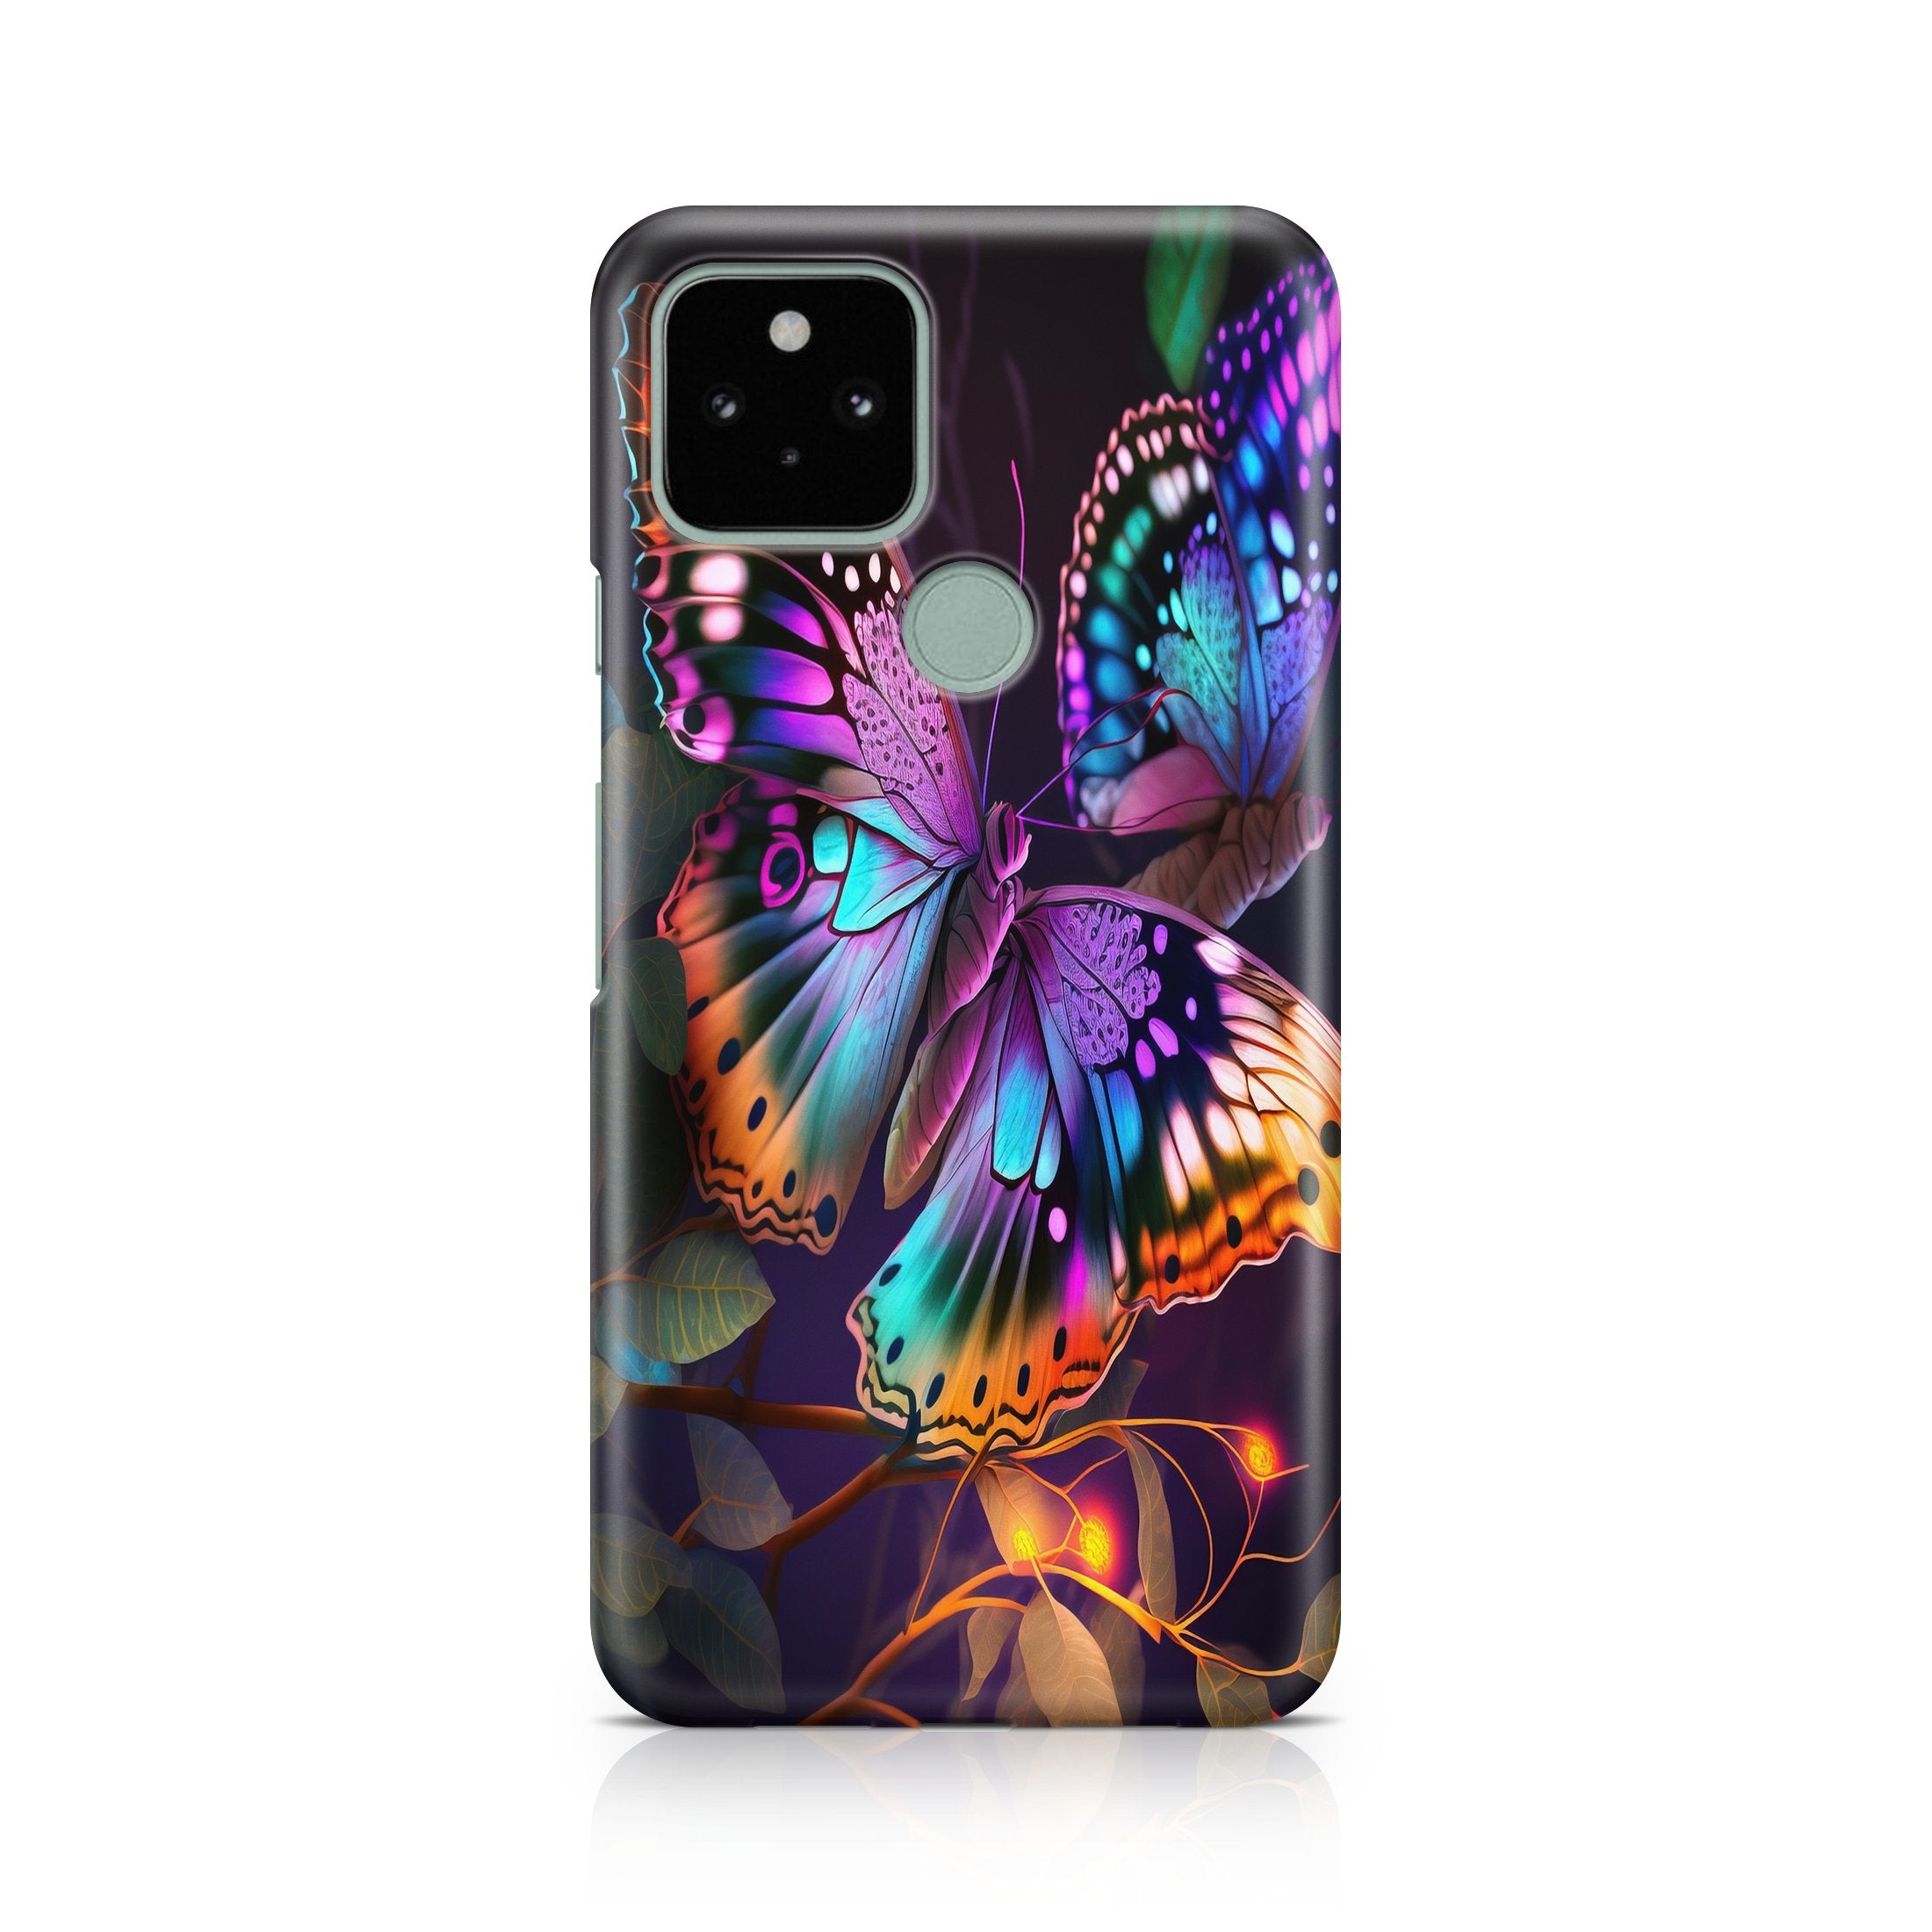 Atomic Butterflies - Google phone case designs by CaseSwagger